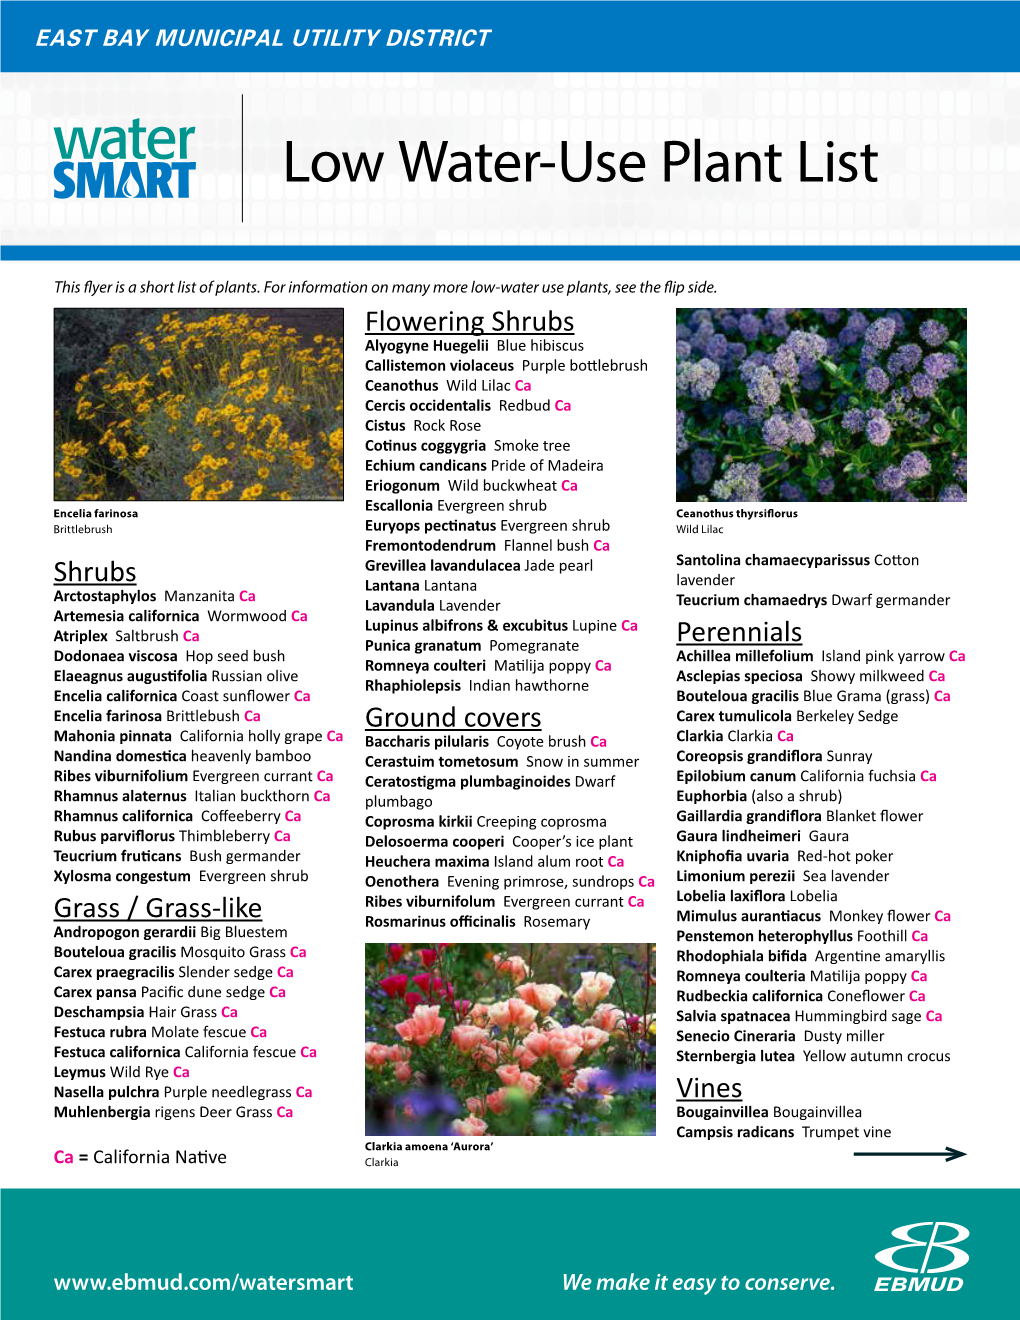 Low Water-Use Plant List